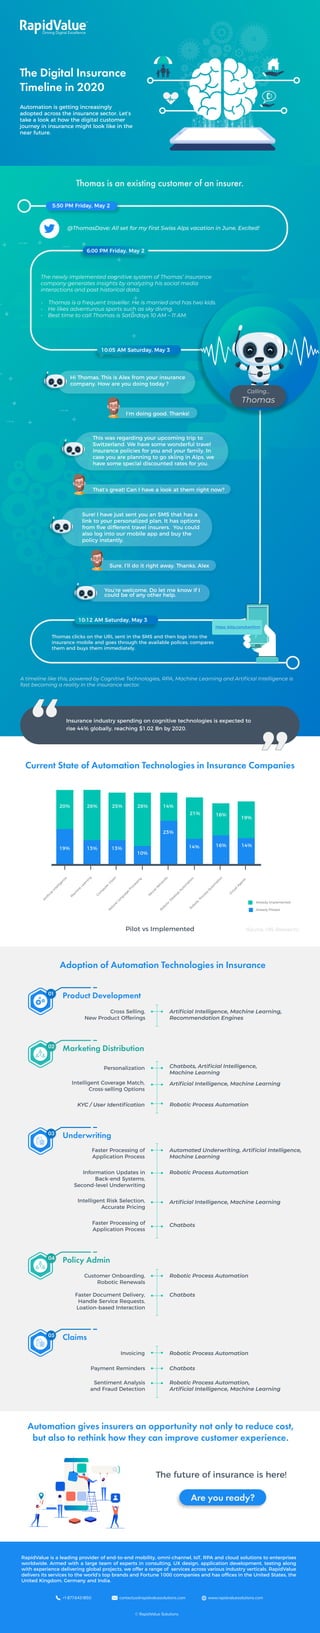 The Digital Insurance
Timeline in 2020
Automation is getting increasingly
adopted across the insurance sector. Let’s
take a look at how the digital customer
journey in insurance might look like in the
near future.
Thomas is an existing customer of an insurer.
A timeline like this, powered by Cognitive Technologies, RPA, Machine Learning and Artiﬁcial Intelligence is
fast becoming a reality in the insurance sector.
Current State of Automation Technologies in Insurance Companies
Adoption of Automation Technologies in Insurance
Already Implemented
Already Piloted
A
rtiﬁcialIntelligence
M
achine
Learning
20%
19%
26% 25% 28%
13% 13%
10%
23%
14%
14%
21% 16%
16% 14%
19%
Com
puterVision
N
aturalLanguage
Processing
N
euralN
etw
orks
R
obotic
D
esktop
Autom
ation
R
obotic
Process
Autom
ation
VirtualAgents
(Source: HfS Research)
The future of insurance is here!
Automation gives insurers an opportunity not only to reduce cost,
but also to rethink how they can improve customer experience.
Are you ready?
RapidValue is a leading provider of end-to-end mobility, omni-channel, IoT, RPA and cloud solutions to enterprises
worldwide. Armed with a large team of experts in consulting, UX design, application development, testing along
with experience delivering global projects, we offer a range of services across various industry verticals. RapidValue
delivers its services to the world’s top brands and Fortune 1000 companies and has offices in the United States, the
United Kingdom, Germany and India.
+1 877.643.1850 contactus@rapidvaluesolutions.com www.rapidvaluesolutions.com
© RapidValue Solutions
10:12 AM Saturday, May 3
5:50 PM Friday, May 2
@ThomasDave: All set for my ﬁrst Swiss Alps vacation in June. Excited!
6:00 PM Friday, May 2
10:05 AM Saturday, May 3
Hi Thomas, This is Alex from your insurance
company. How are you doing today ?
You’re welcome. Do let me know if I
could be of any other help.
This was regarding your upcoming trip to
Switzerland. We have some wonderful travel
insurance policies for you and your family. In
case you are planning to go skiing in Alps, we
have some special discounted rates for you.
Sure! I have just sent you an SMS that has a
link to your personalized plan. It has options
from ﬁve different travel insurers. You could
also log into our mobile app and buy the
policy instantly.
I’m doing good. Thanks!
That’s great! Can I have a look at them right now?
Sure. I’ll do it right away. Thanks, Alex
Thomas clicks on the URL sent in the SMS and then logs into the
insurance mobile and goes through the available polices, compares
them and buys them immediately.
The newly implemented cognitive system of Thomas’ insurance
company generates insights by analyzing his social media
interactions and past historical data.
- Thomas is a frequent traveller. He is married and has two kids.
• He likes adventurous sports such as sky diving.
• Best time to call Thomas is Saturdays 10 AM – 11 AM.
https: bitly.com/conﬁrm
Pilot vs Implemented
Hi
Thomas
Calling...
Insurance industry spending on cognitive technologies is expected to
rise 44% globally, reaching $1.02 Bn by 2020.
Product Development01
Underwriting03
Claims05
Marketing Distribution02
Policy Admin04
Cross Selling,
New Product Offerings
Artiﬁcial Intelligence, Machine Learning,
Recommendation Engines
Customer Onboarding,
Robotic Renewals
Faster Document Delivery,
Handle Service Requests,
Loation-based Interaction
Robotic Process Automation
Chatbots
Invoicing Robotic Process Automation
Payment Reminders
Sentiment Analysis
and Fraud Detection
Chatbots
Robotic Process Automation,
Artiﬁcial Intelligence, Machine Learning
Personalization Chatbots, Artiﬁcial Intelligence,
Machine Learning
Intelligent Coverage Match,
Cross-selling Options
Artiﬁcial Intelligence, Machine Learning
Robotic Process AutomationKYC / User Identiﬁcation
Faster Processing of
Application Process
Automated Underwriting, Artiﬁcial Intelligence,
Machine Learning
Information Updates in
Back-end Systems,
Second-level Underwriting
Robotic Process Automation
Intelligent Risk Selection,
Accurate Pricing
Artiﬁcial Intelligence, Machine Learning
ChatbotsFaster Processing of
Application Process
 